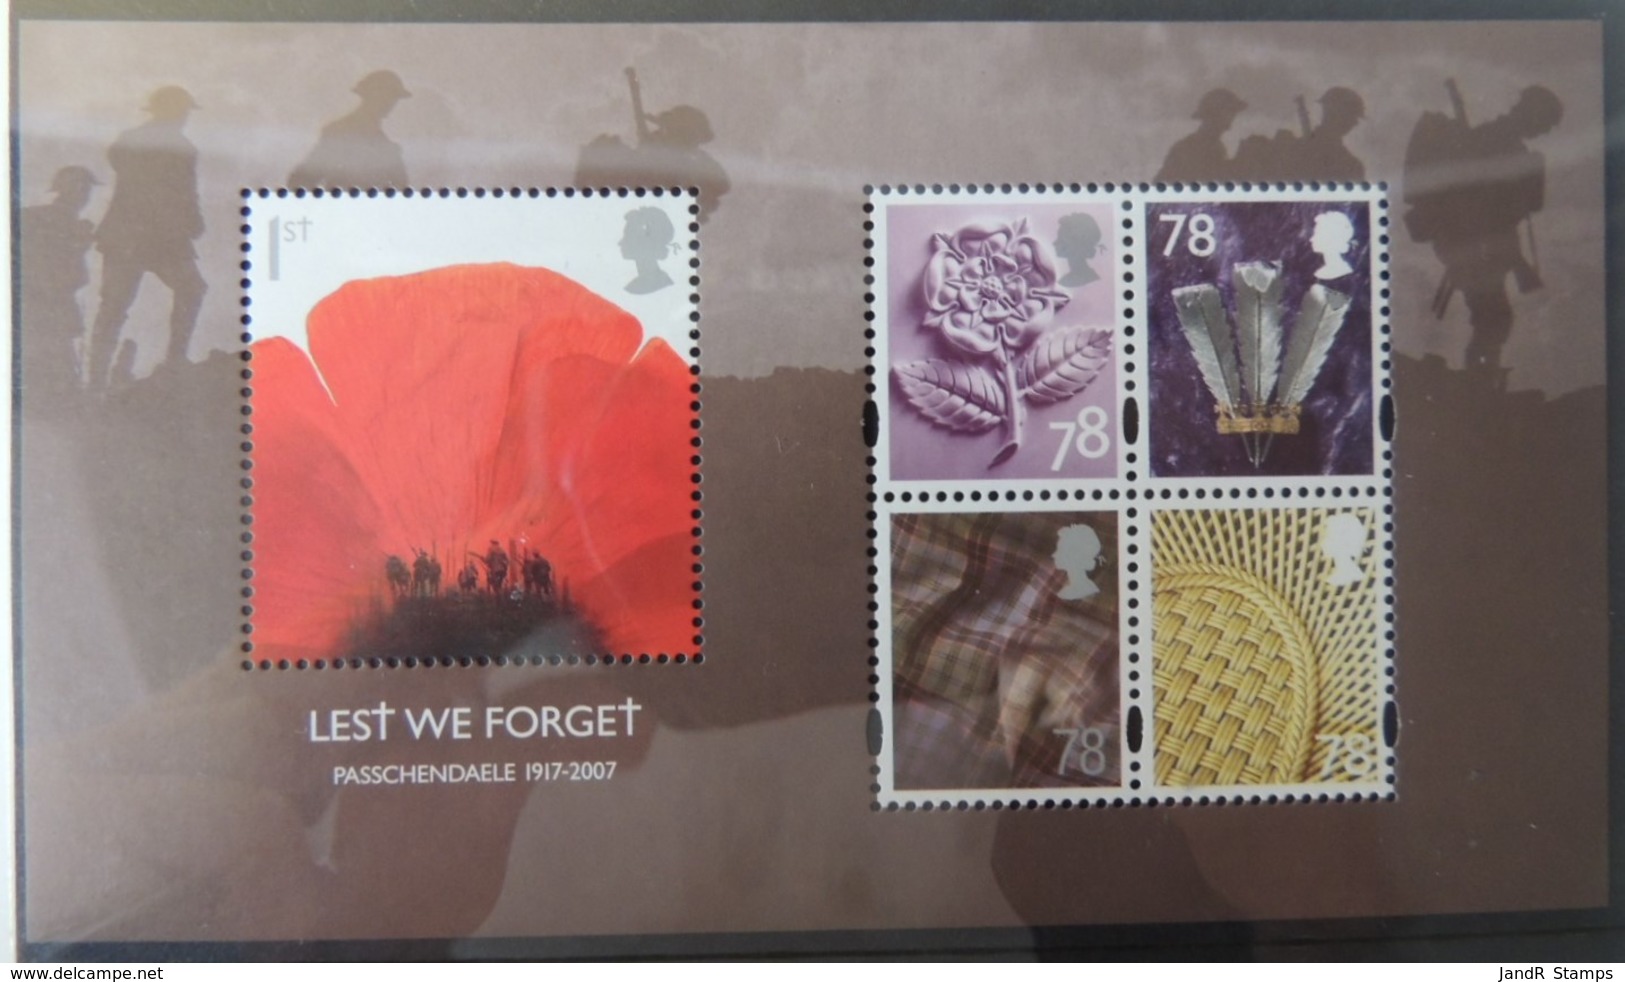 GREAT BRITAIN 2007 LEST WE FORGET MINIATURE SHEET MS2796 UNMOUNTED MINT WWI PASSCHENDAELE POPPY MILITARIA - Unused Stamps